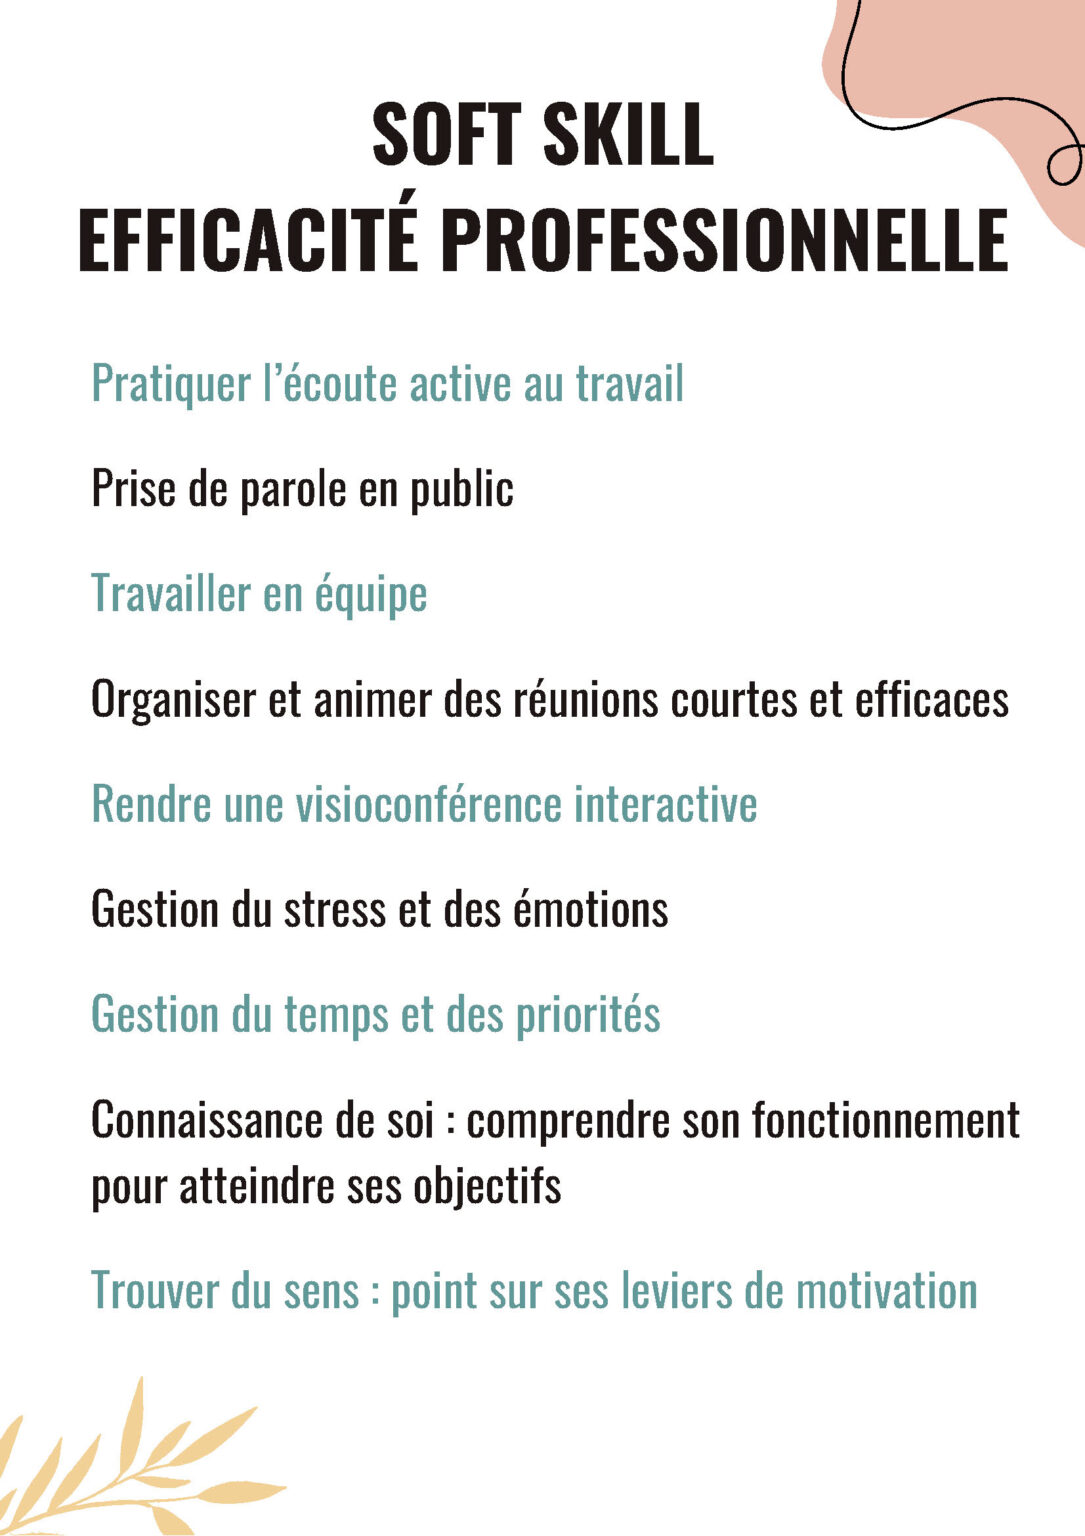 Infos formations_Page_3